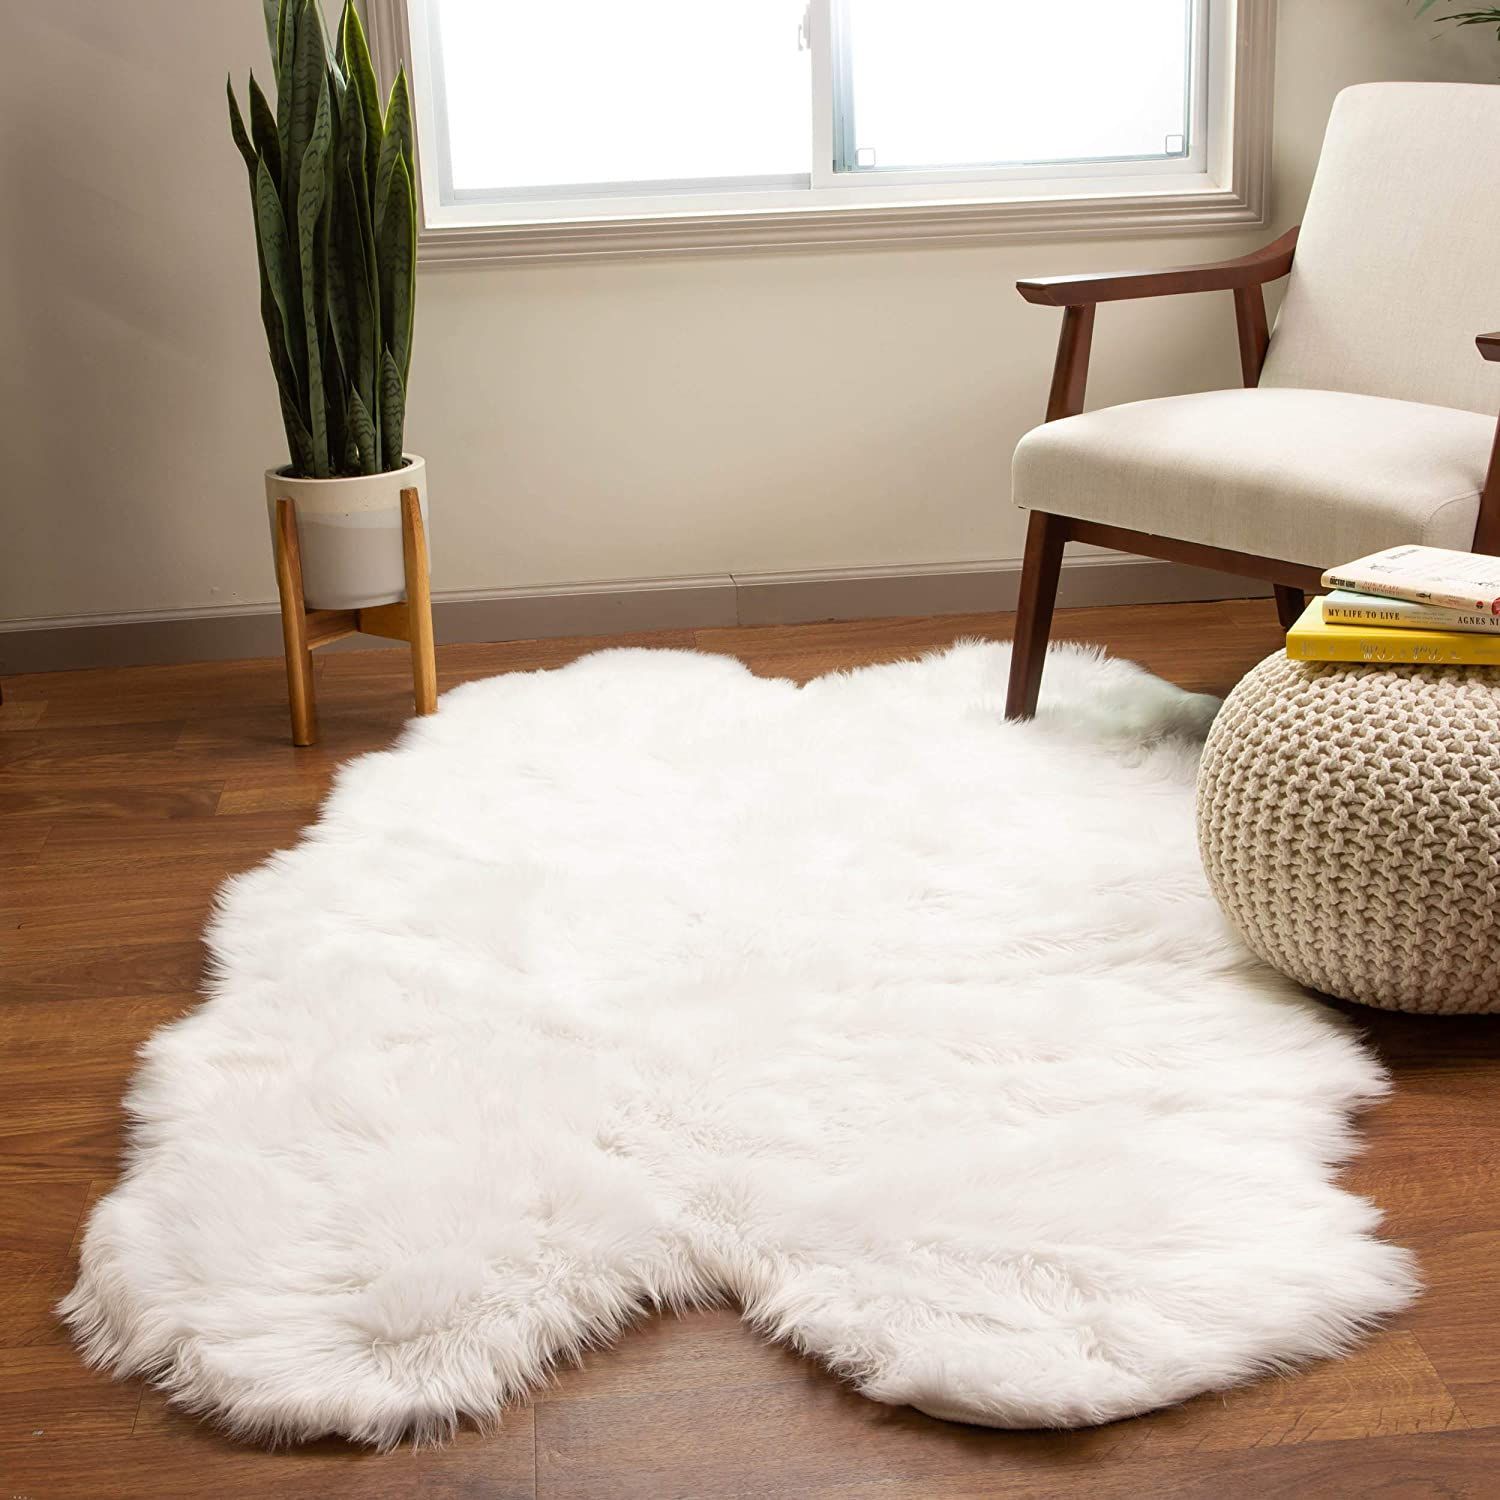 Soft Area Rugs To Make Your Home Cozy, What Makes A Rug Good Quality